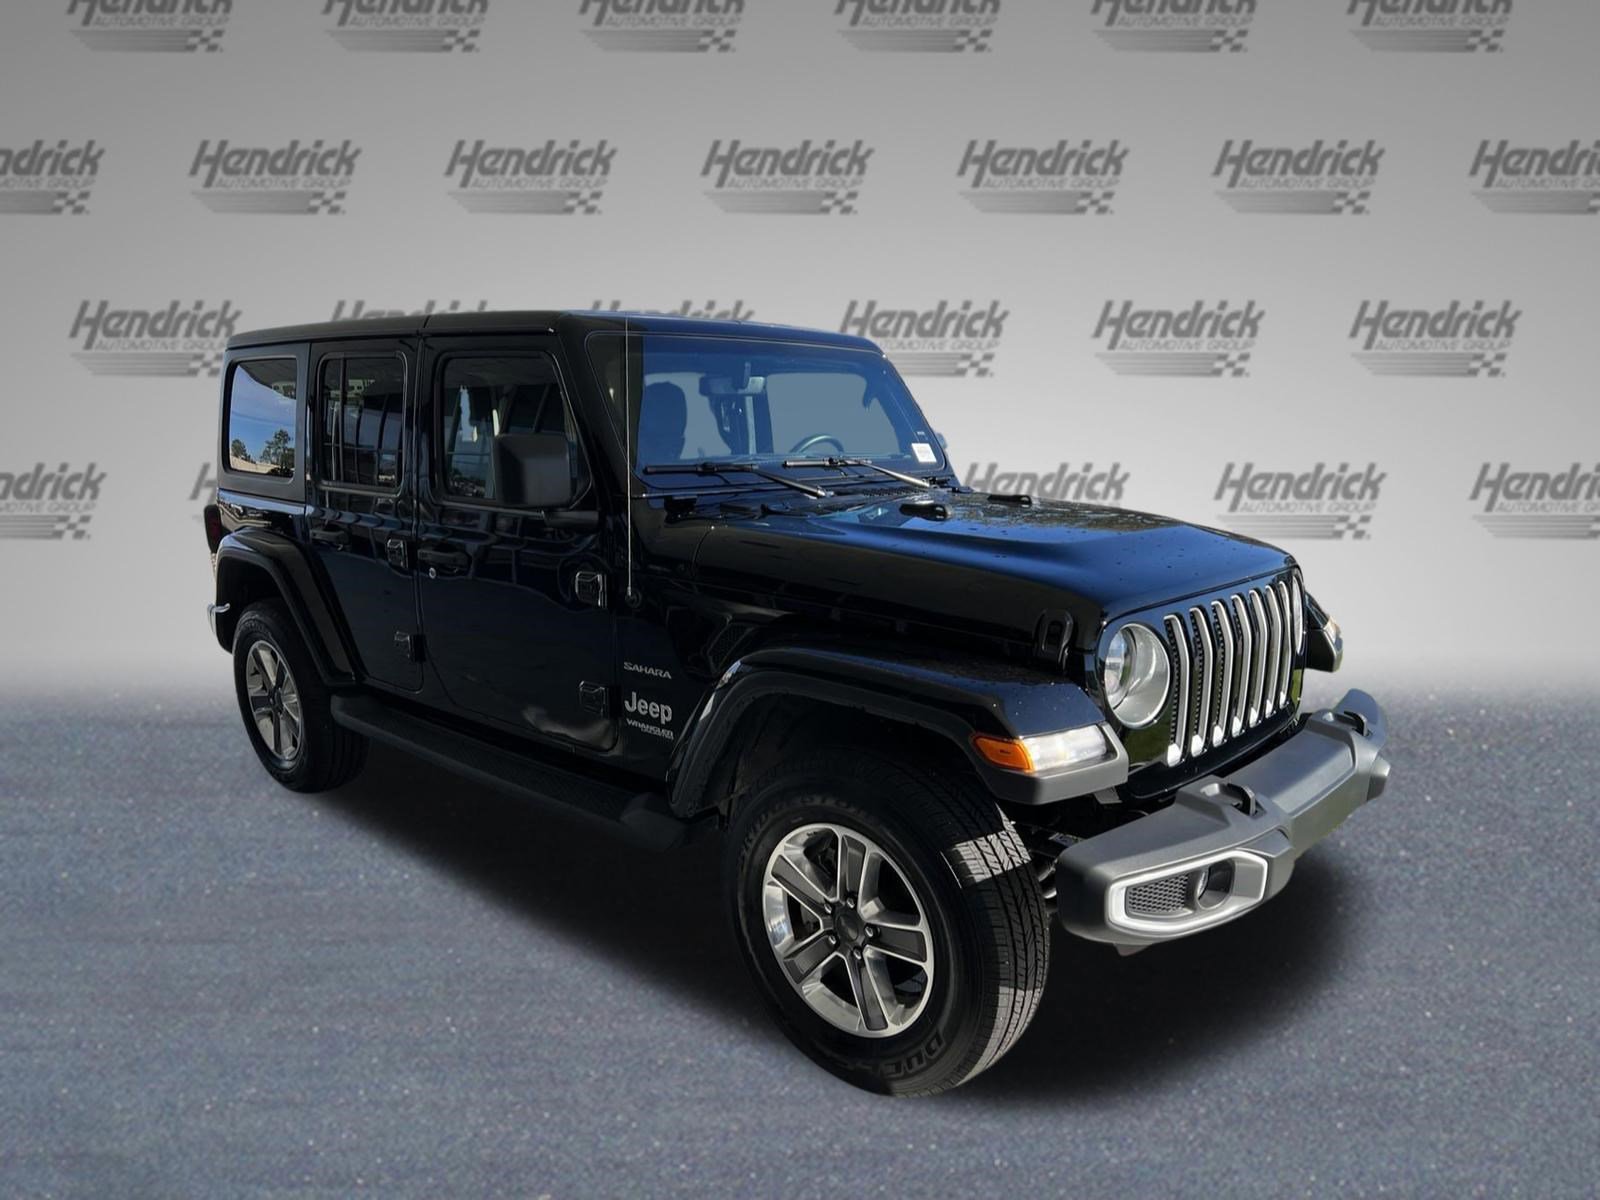 Certified Pre-Owned 2022 Jeep Wrangler Unlimited Sahara Convertible in Cary  #P58890 | Hendrick Dodge Cary